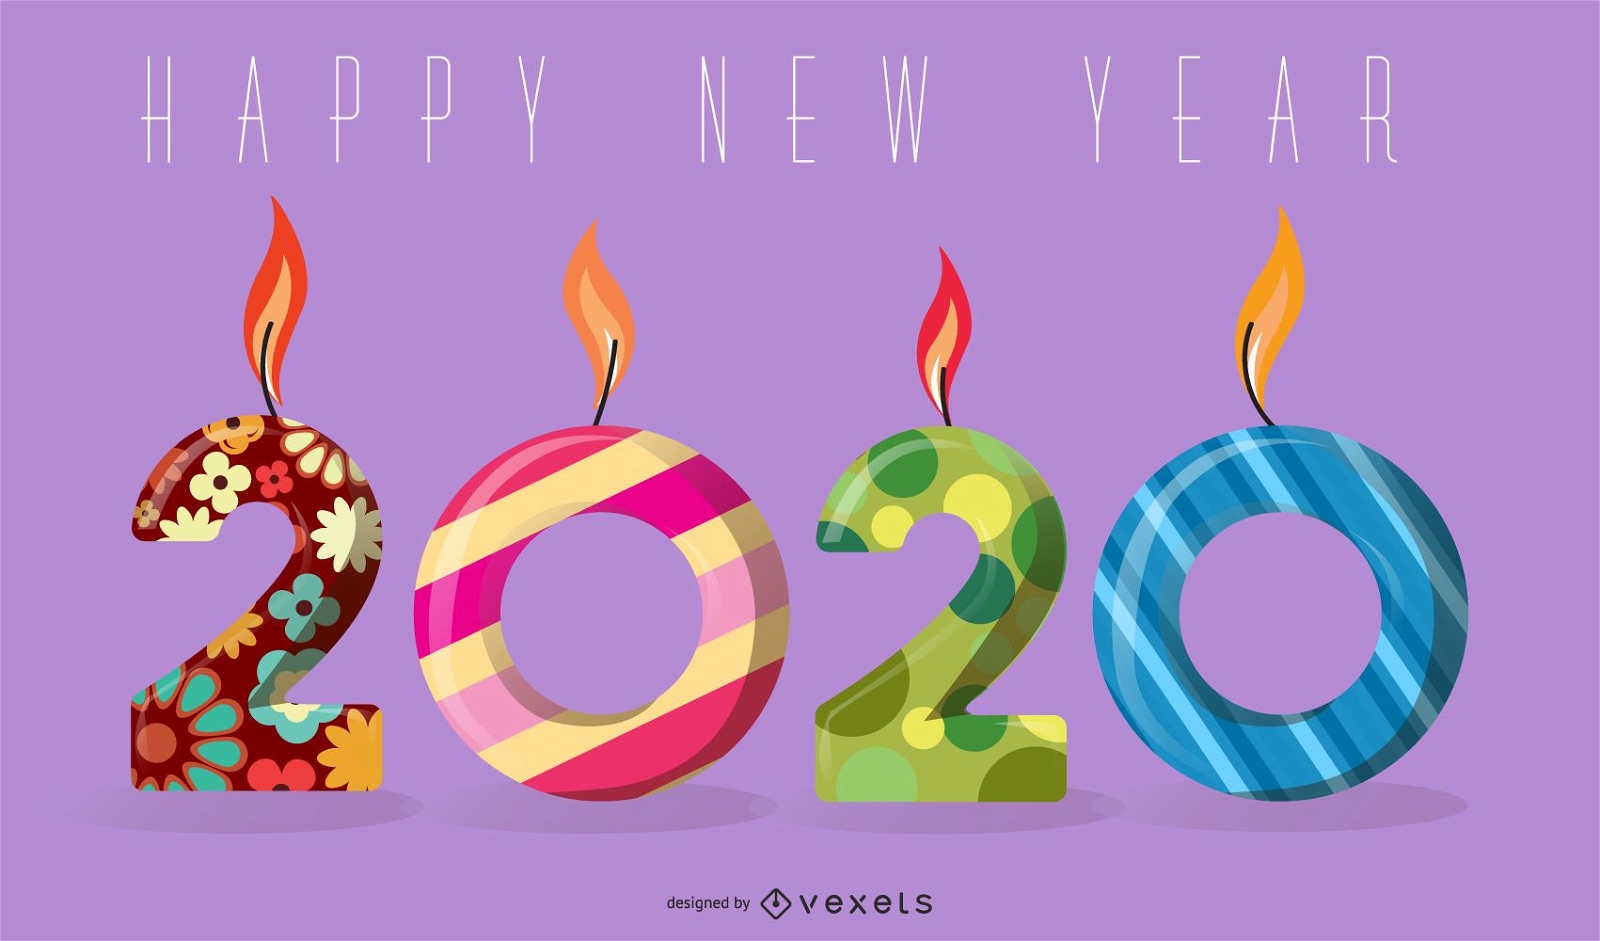 New Year 2020 Candle Lights Greeting Design